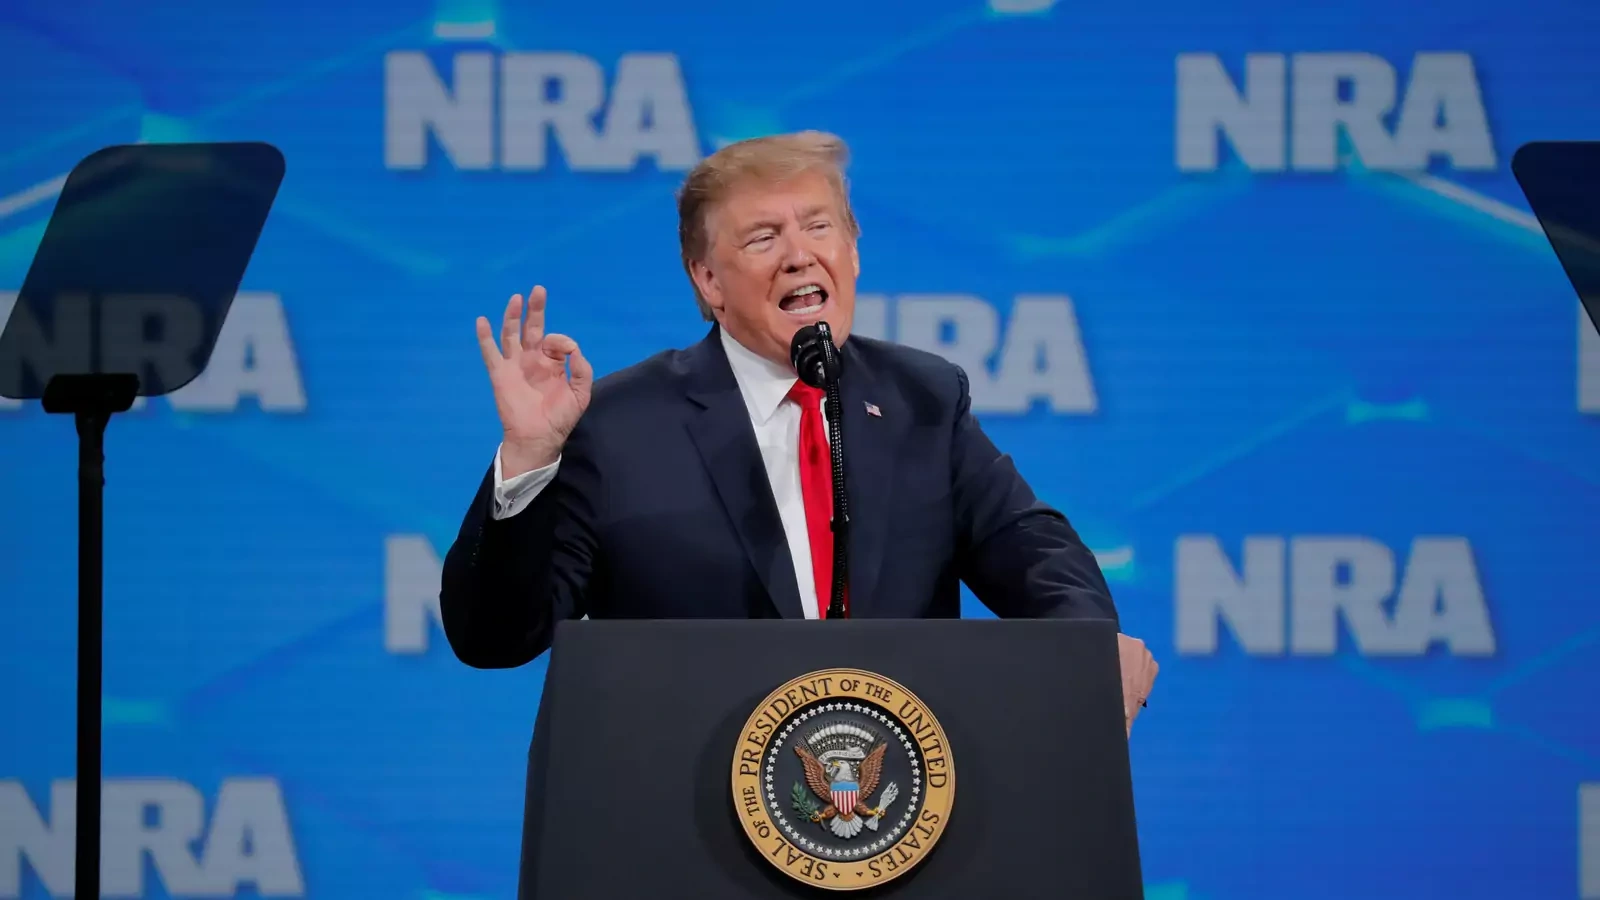 U.S. President Donald Trump gestures as he addresses the 148th National Rifle Association (NRA) annual meeting in Indianapolis, Indiana, U.S., April 26, 2019.